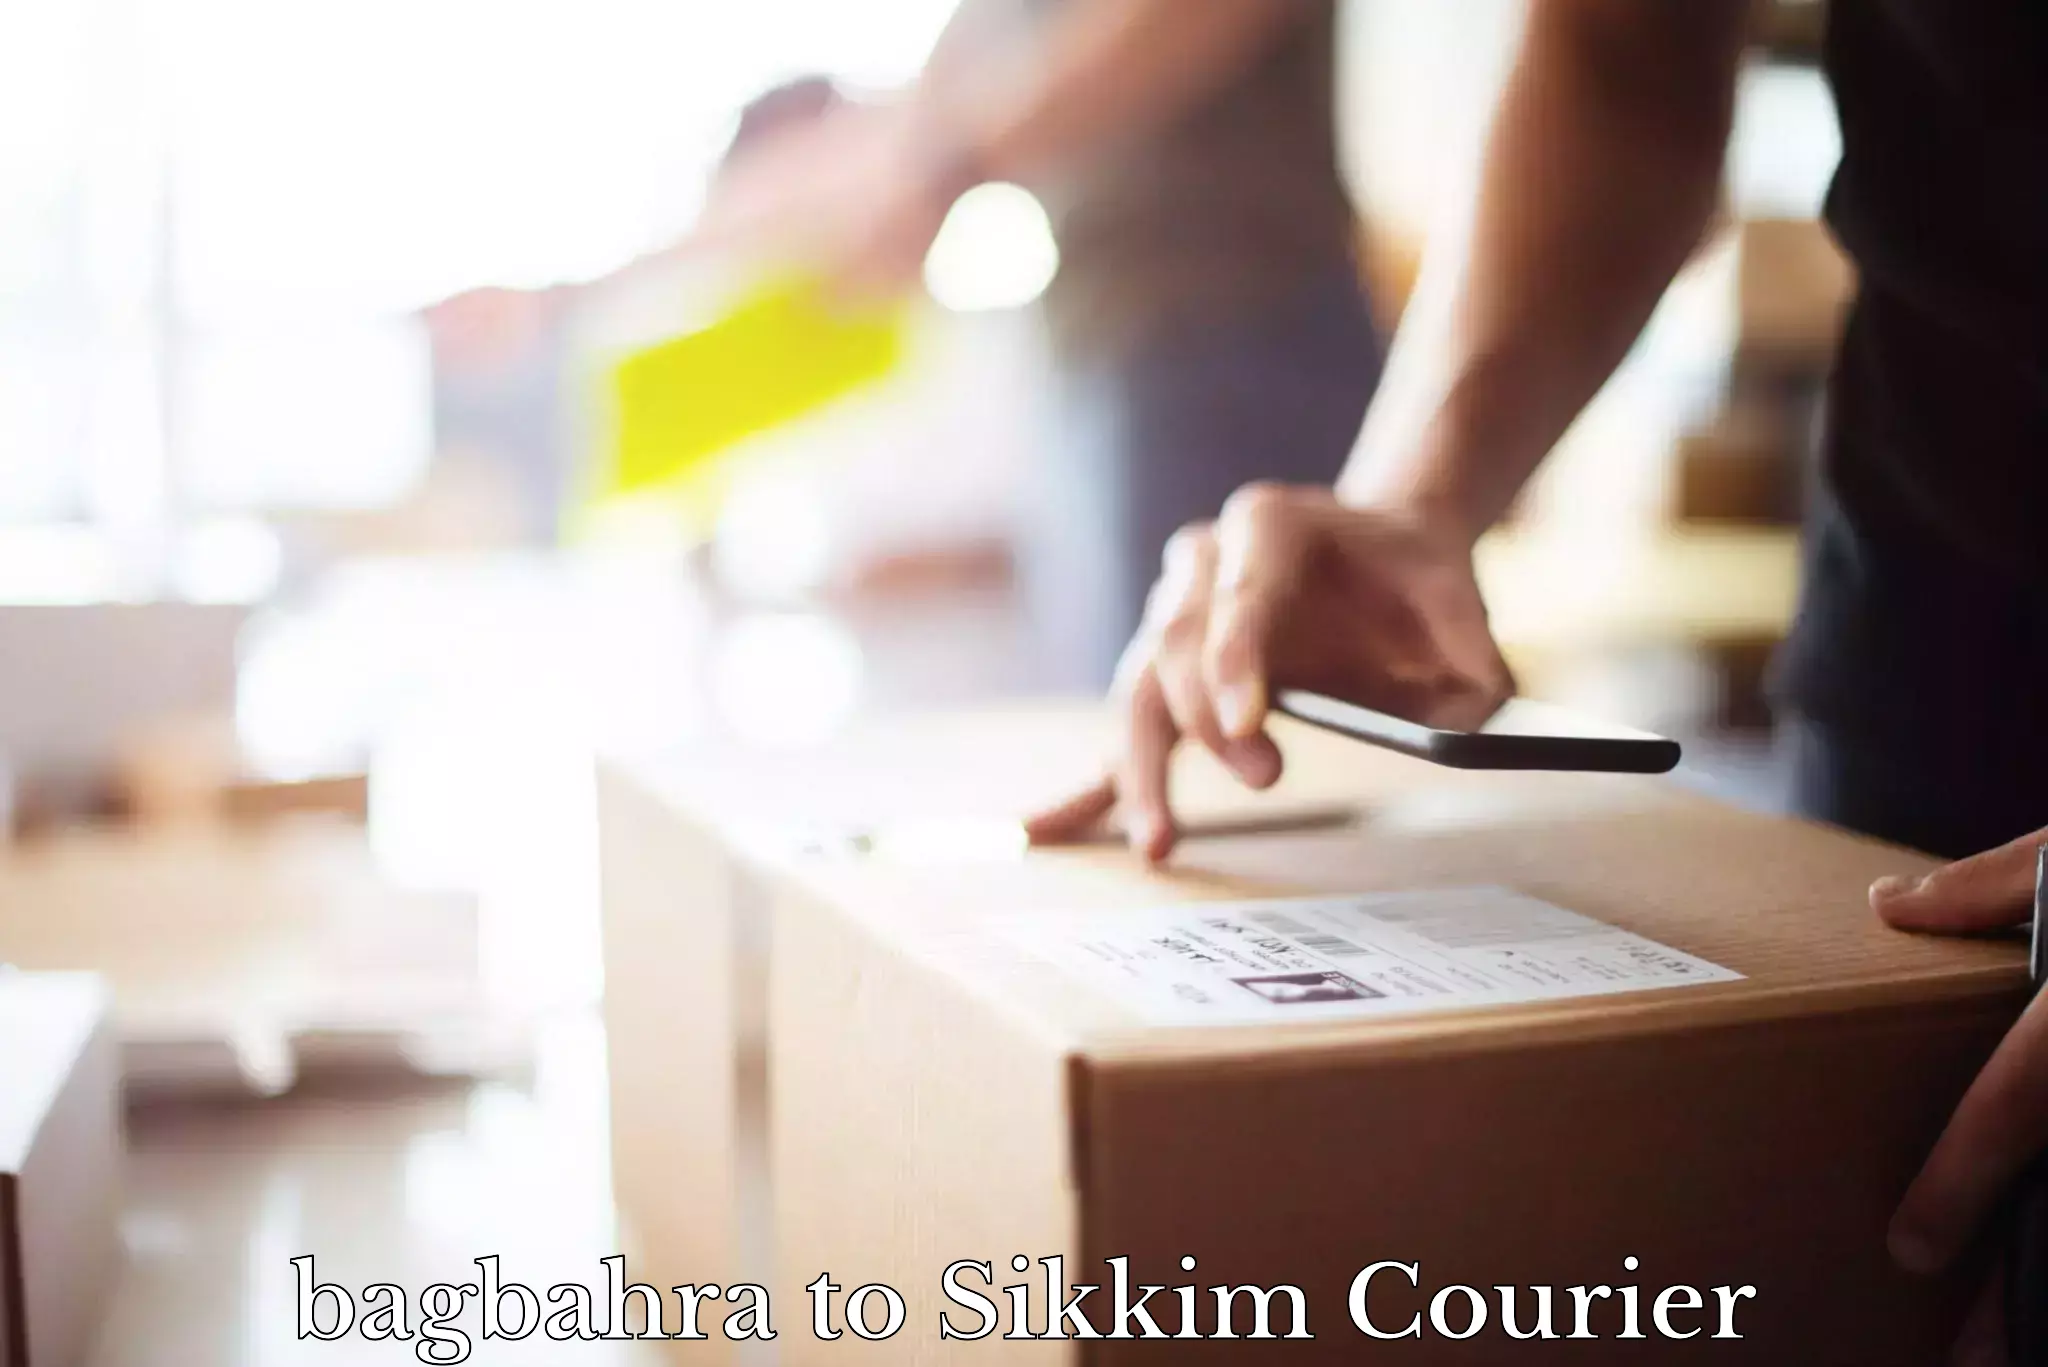 Multi-city courier bagbahra to Sikkim